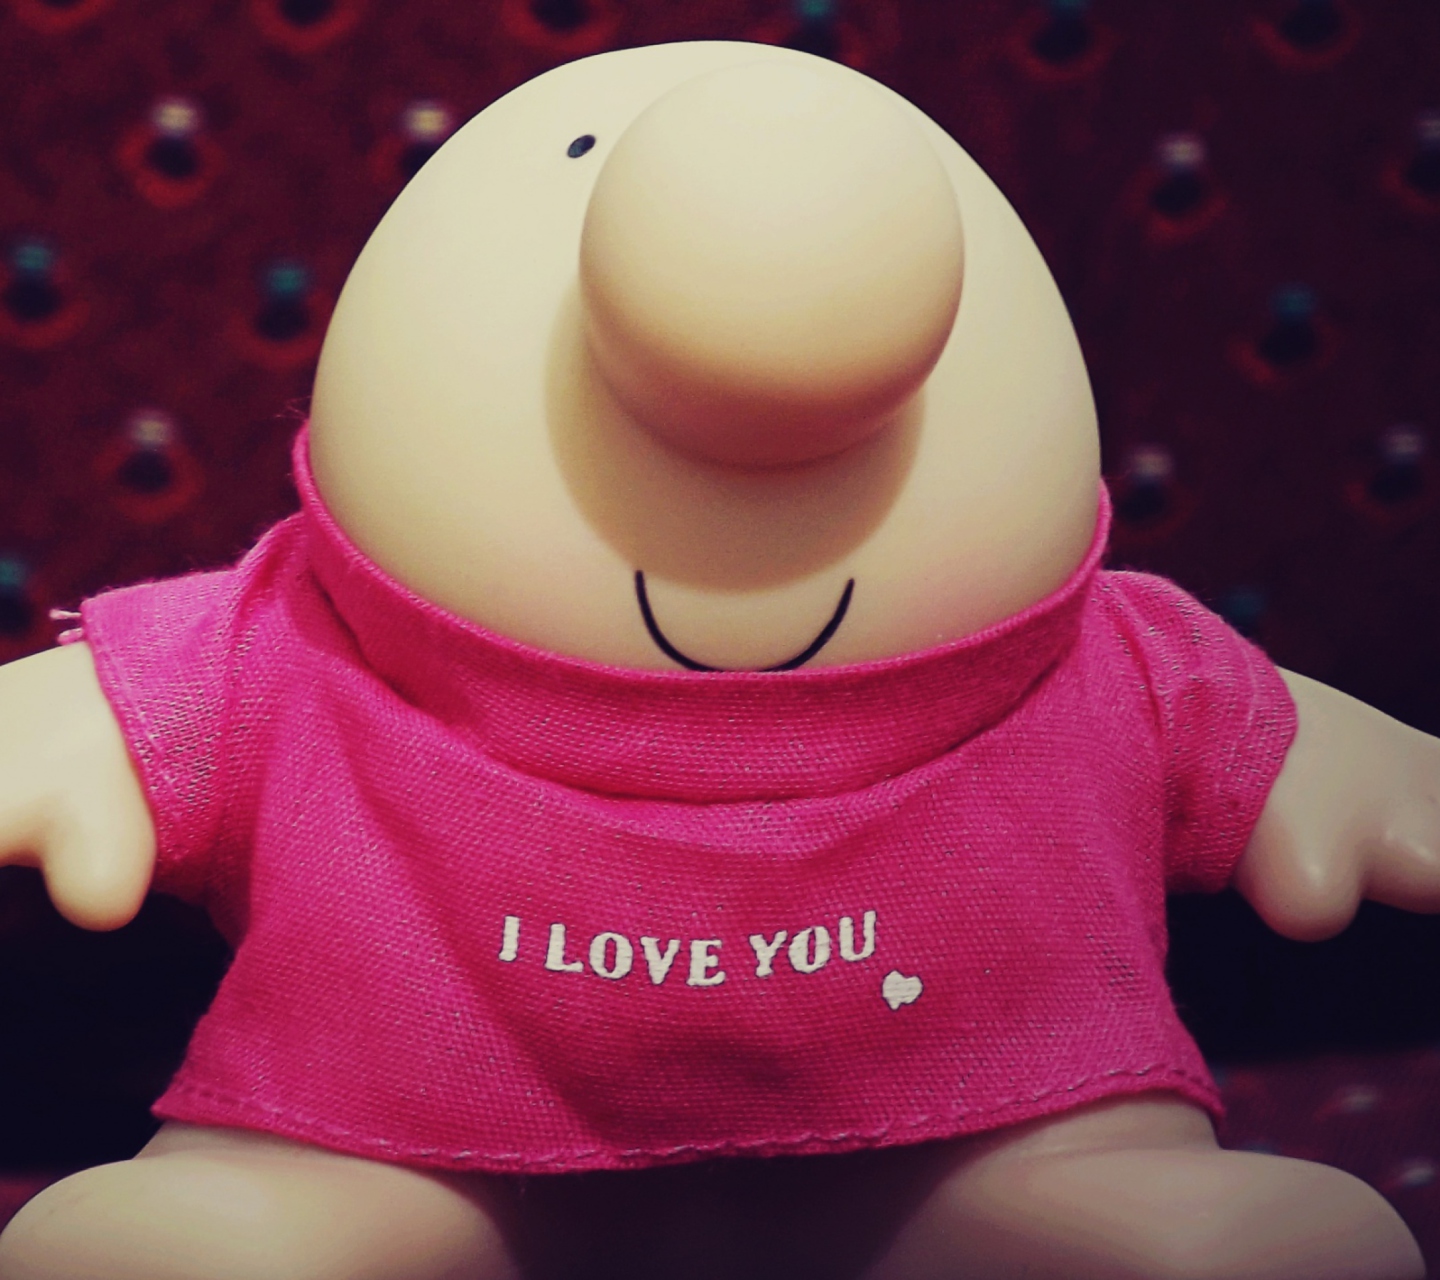 I Love You Toy wallpaper 1440x1280